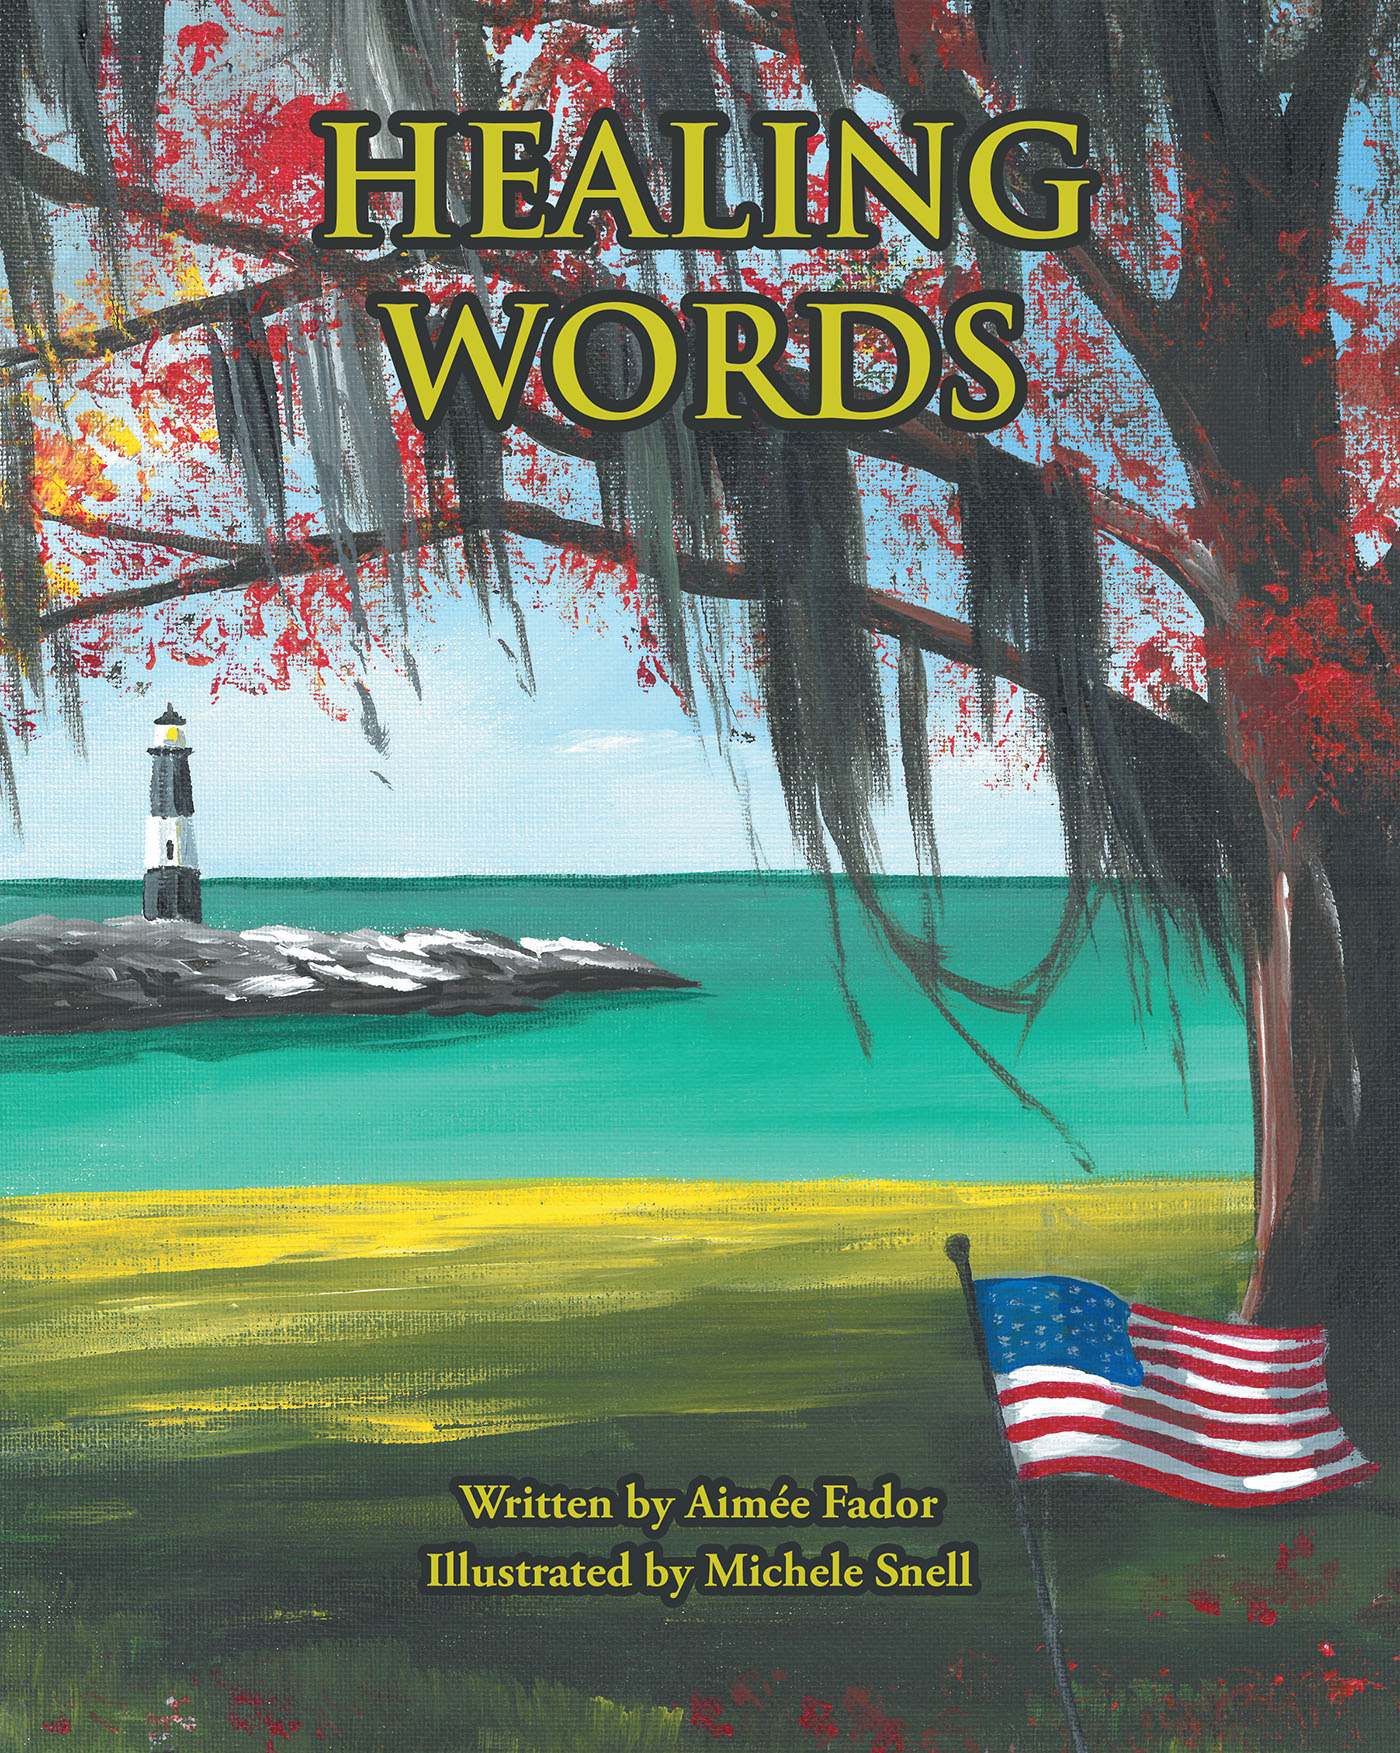 Author Aimée Fador’s New Book, "Healing Words," is a Moving, Emotional Story That Discusses Timely Issues Through the Transformative Lens of Faith